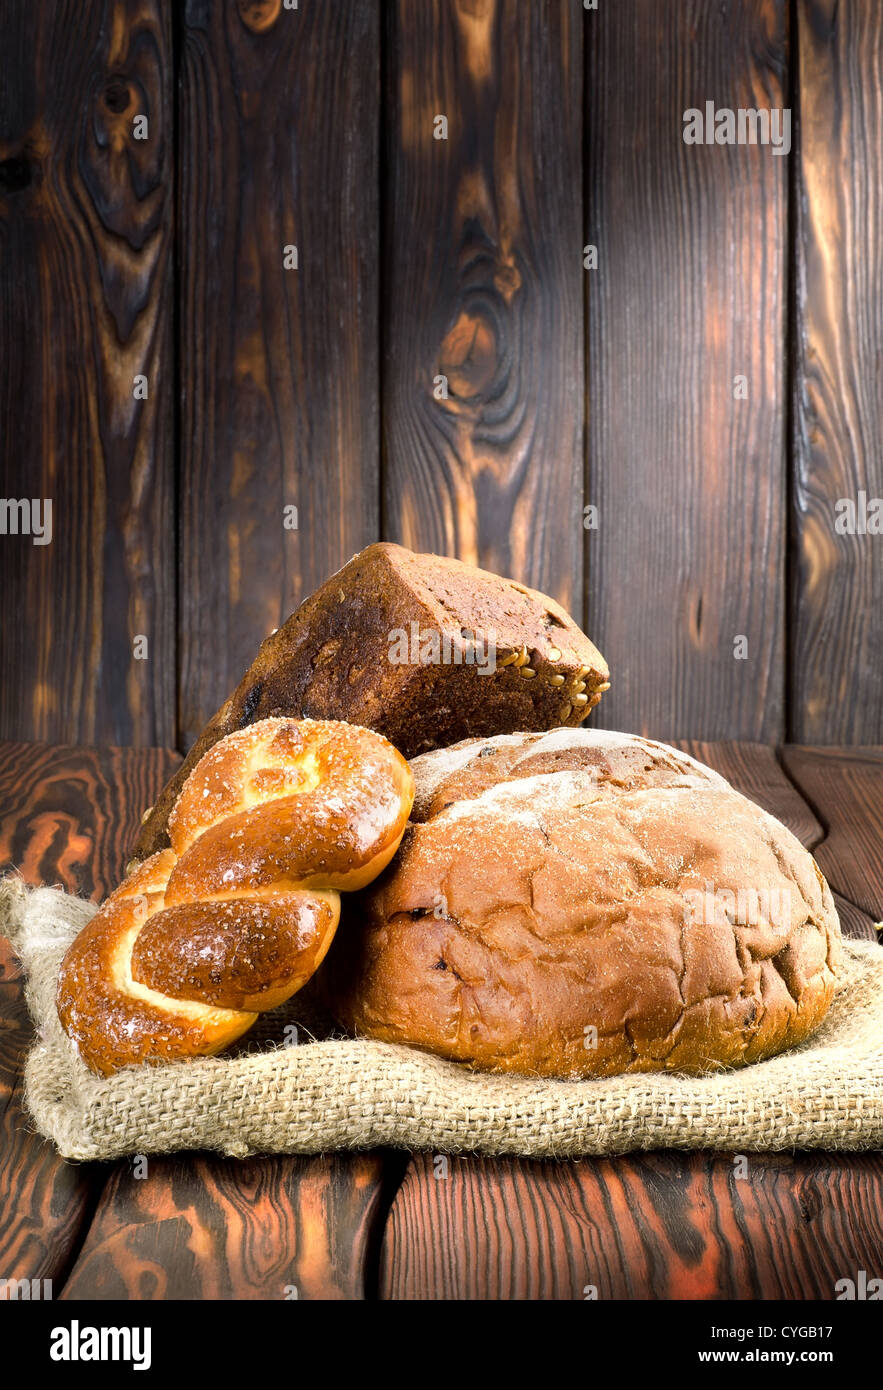 Bakery products on a wooden brown background Stock Photo